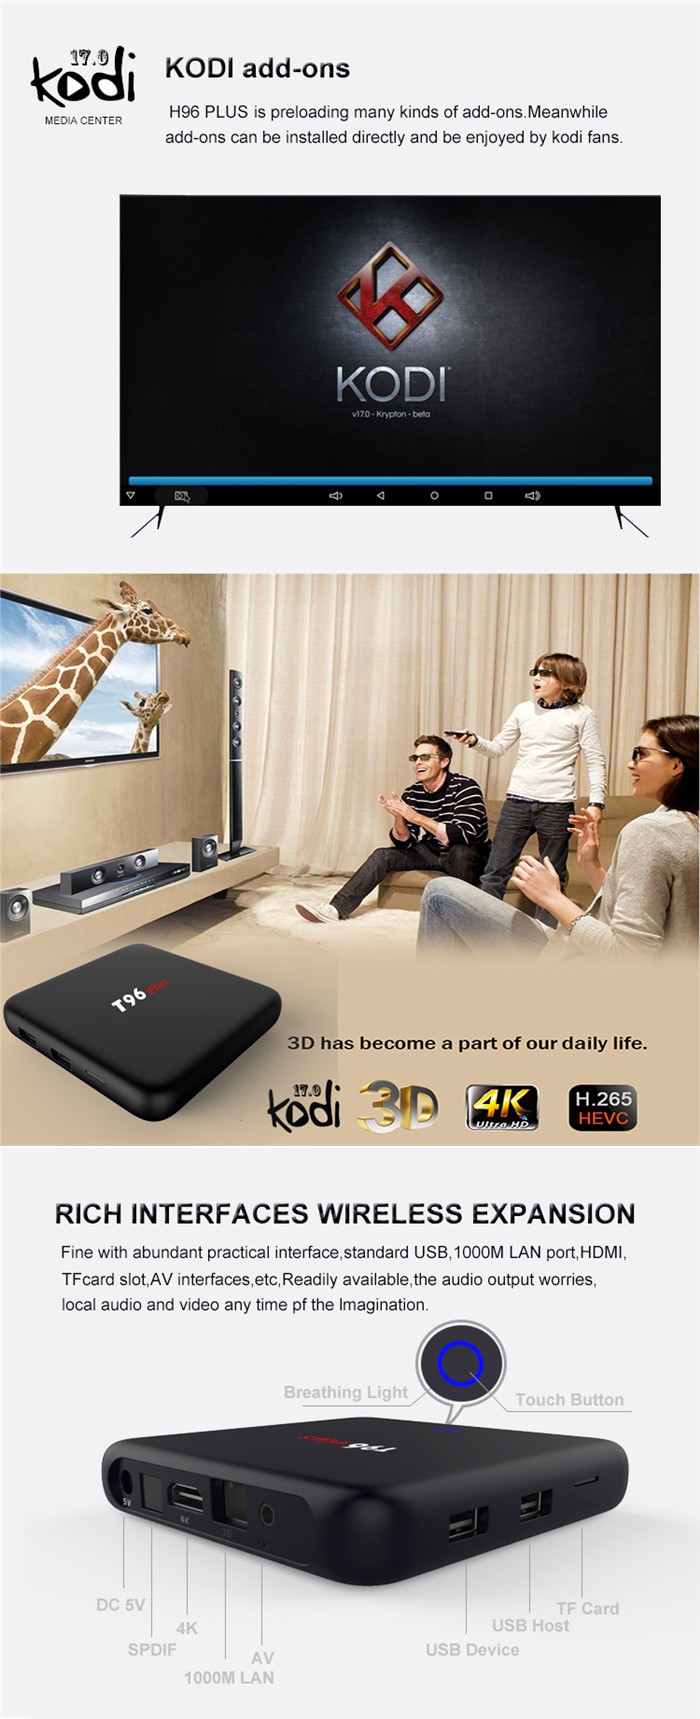 T96 PLUS S912 3G+16G Android 6.0 Marshmallow with Kodi16.1 TV Box Touch Power Button with Circuit Breathing Lamp